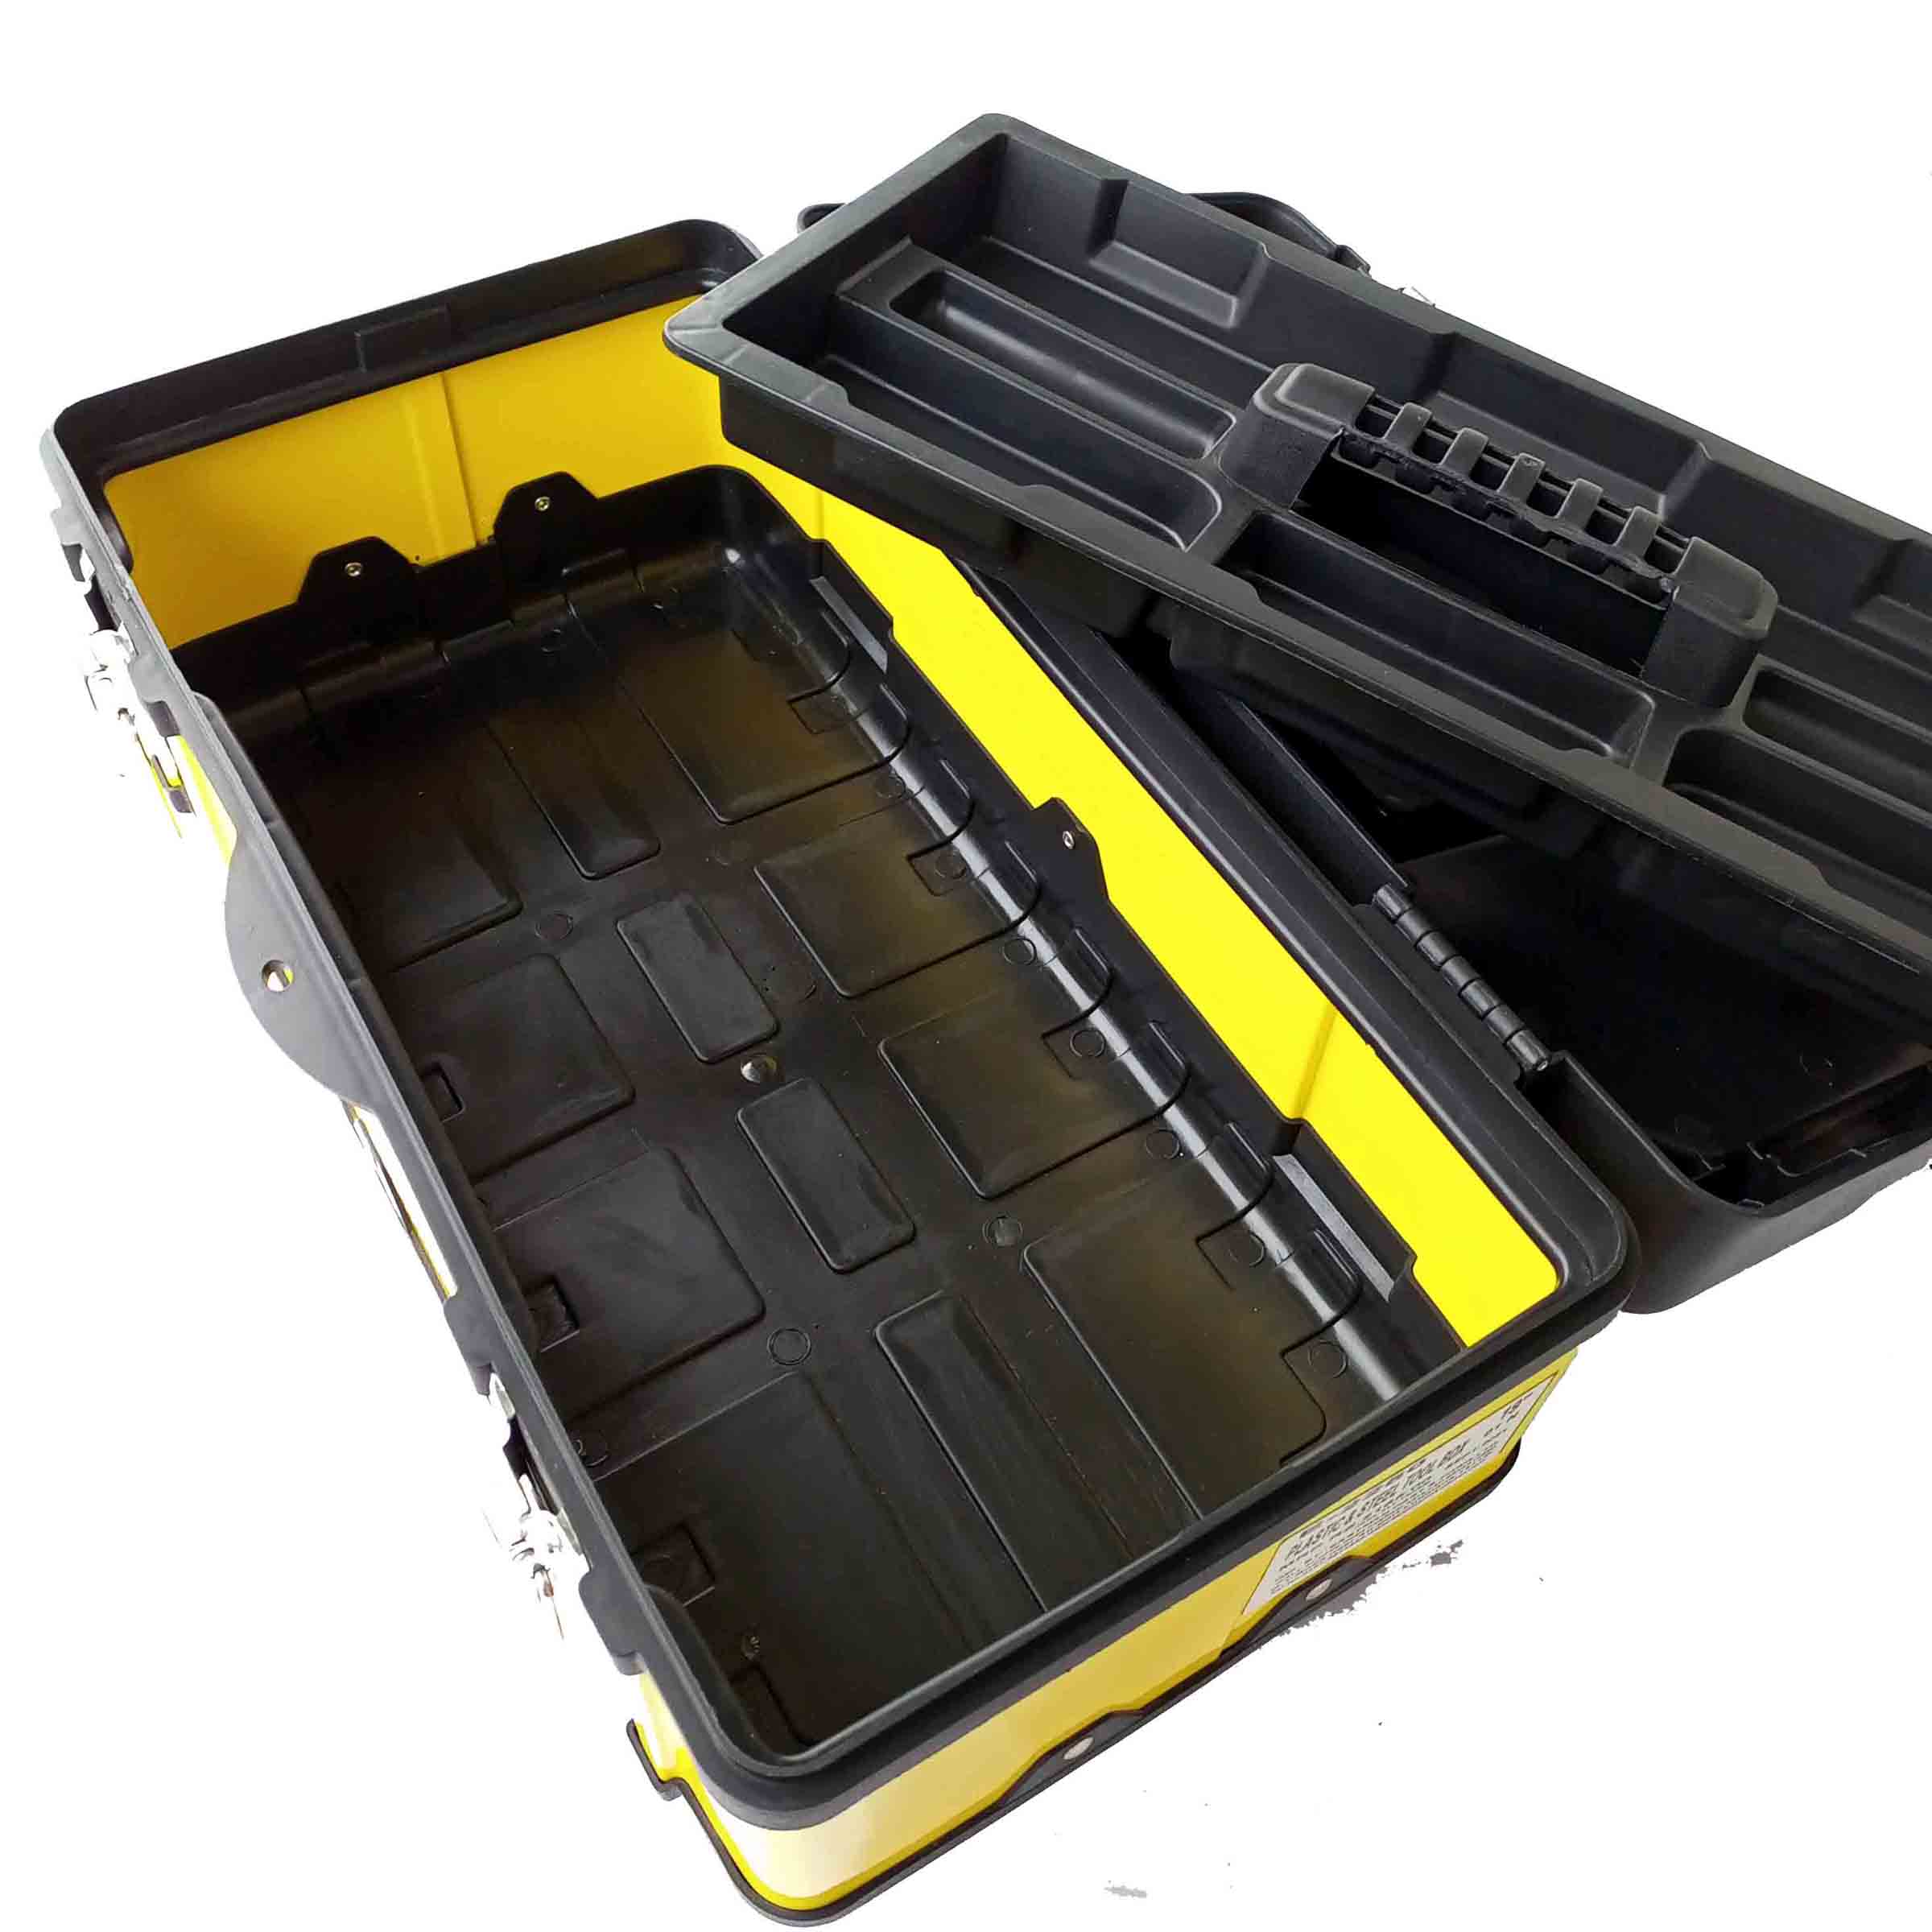 EASTMAN E-2250 RECTANGLE PLASTIC TOOL BOX AND STEEL TOOL BOX CONTAINER  BLACK 19 INCH 25KG WITH TREY - OPERA TOOLS